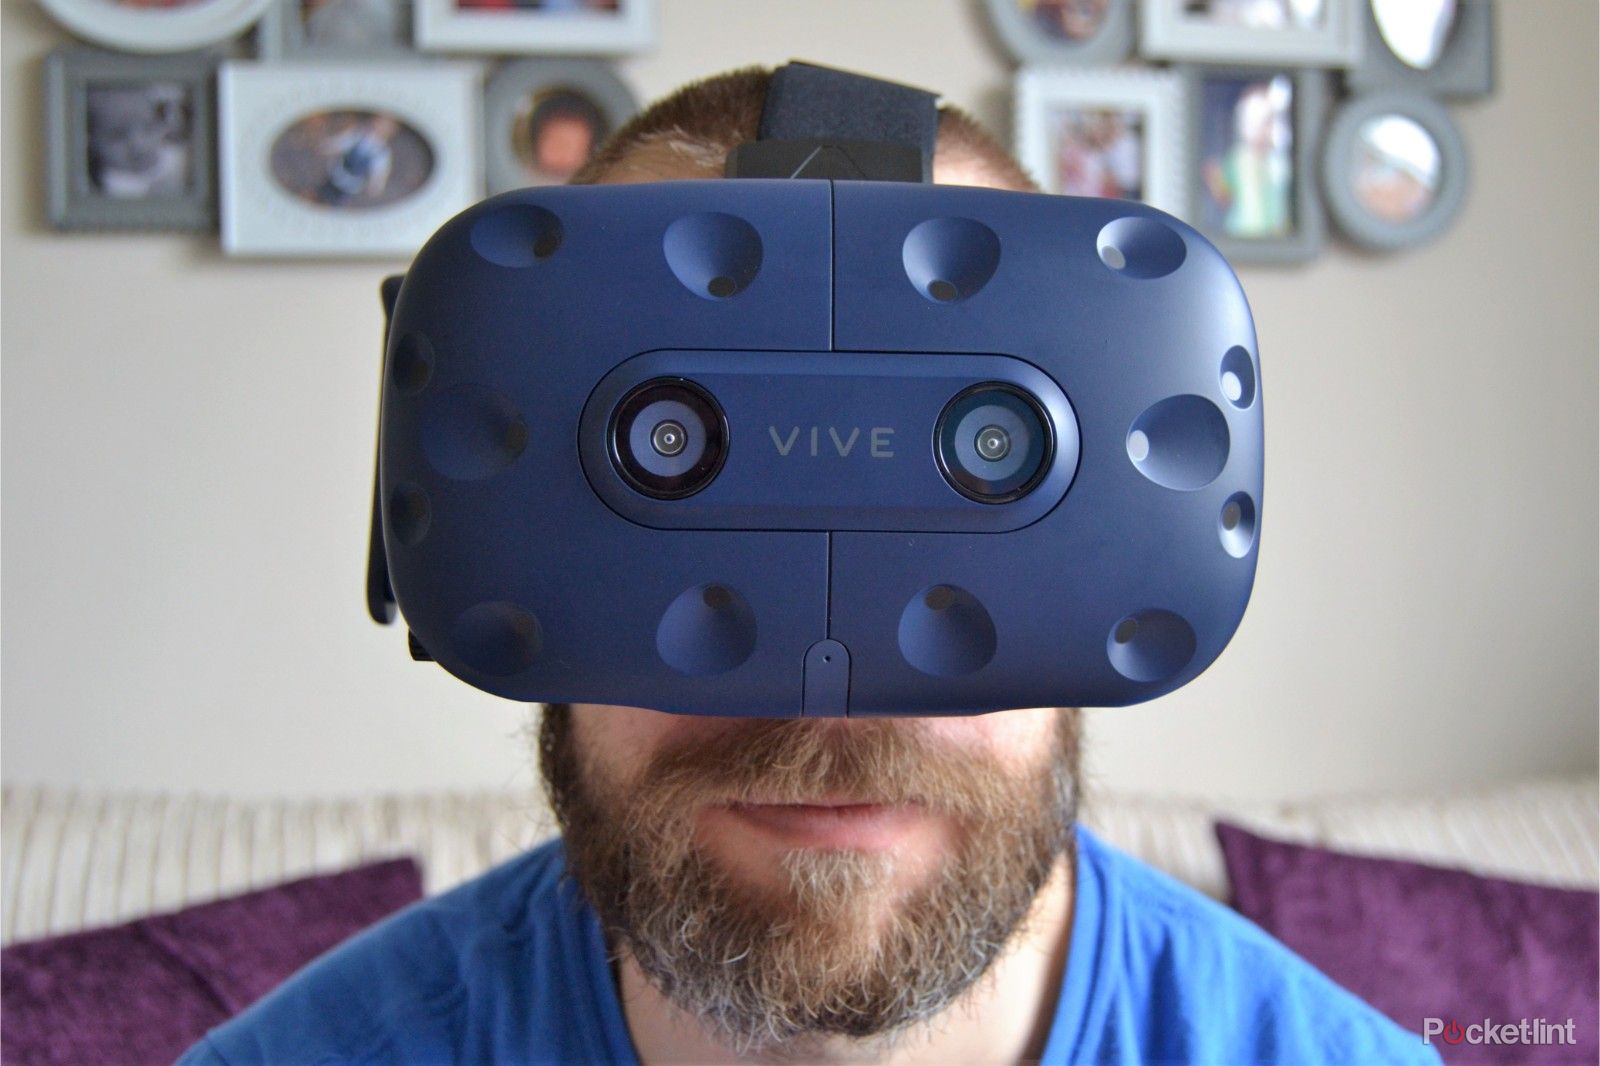 New SDK turns your HTC Vive Pro into an AR headset image 1